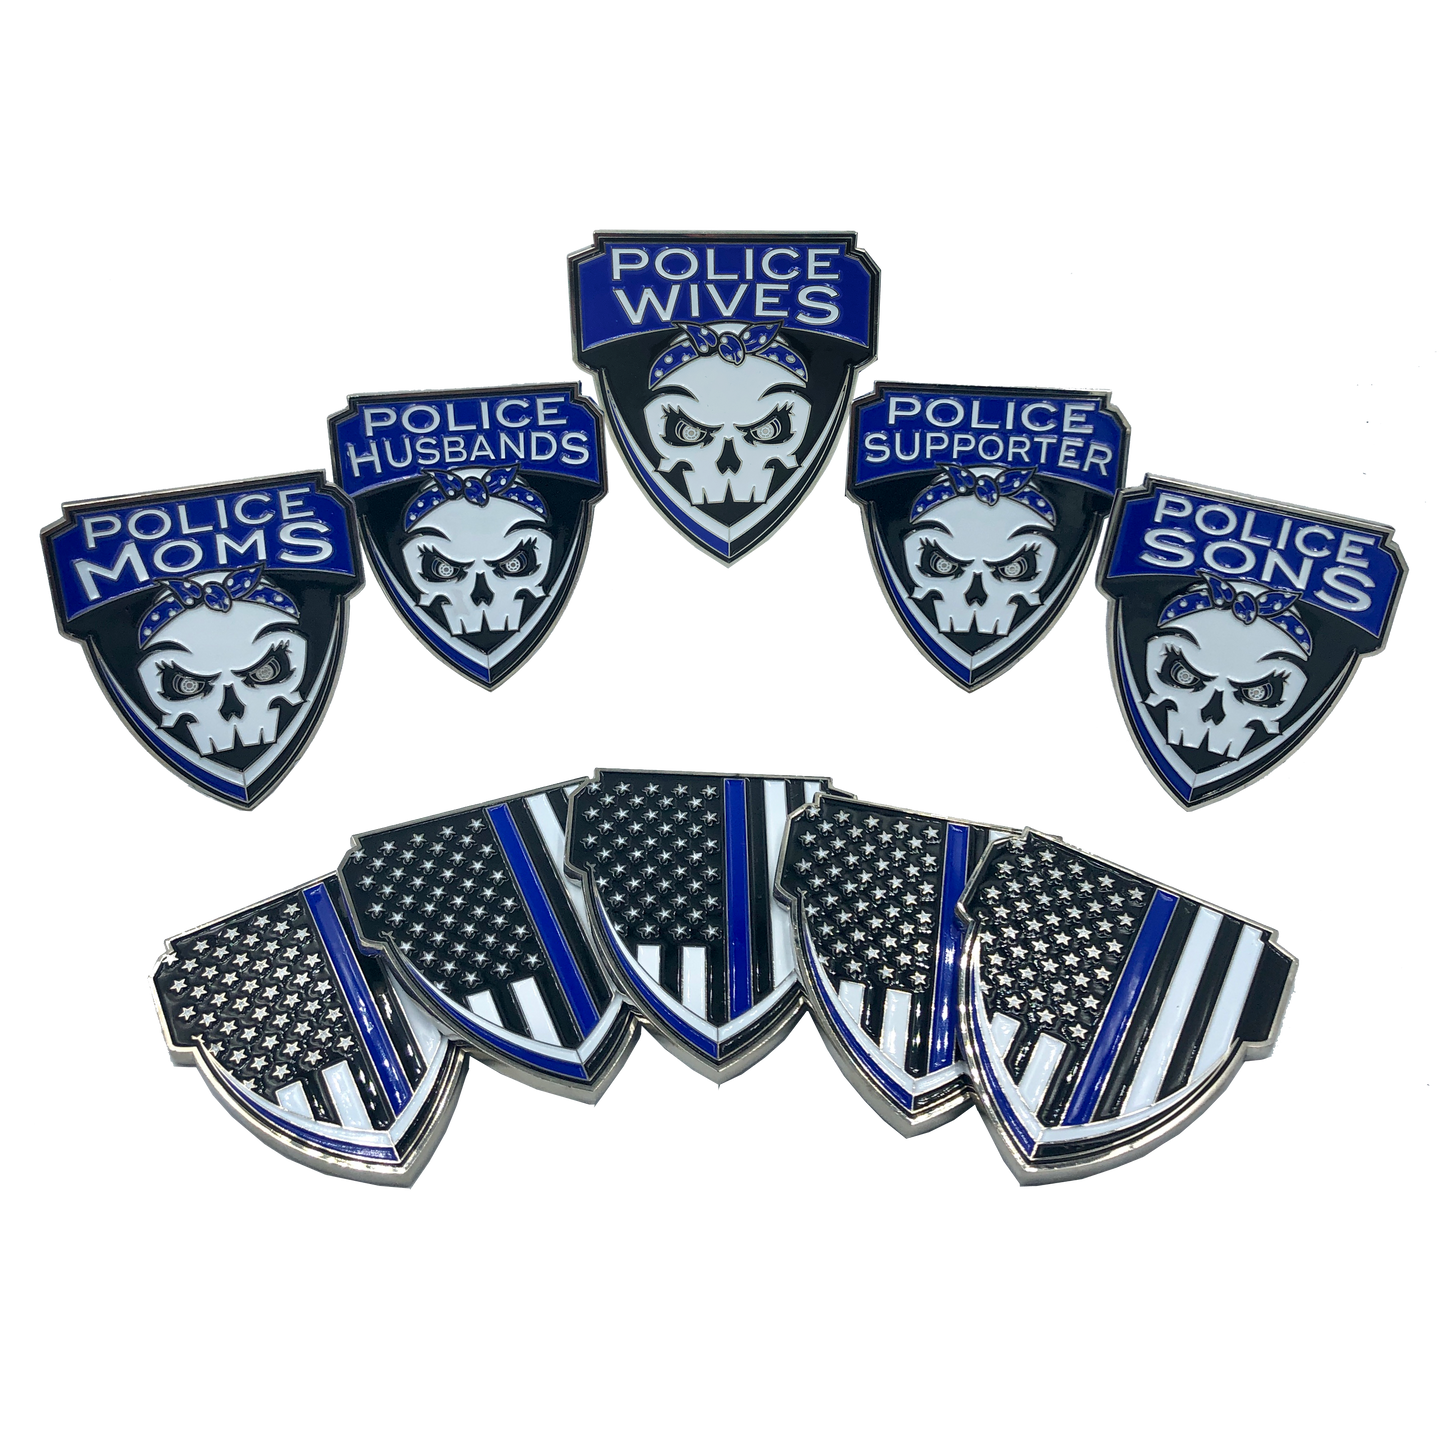 E-002 Police Moms Thin Blue Line Challenge Coin Supporter